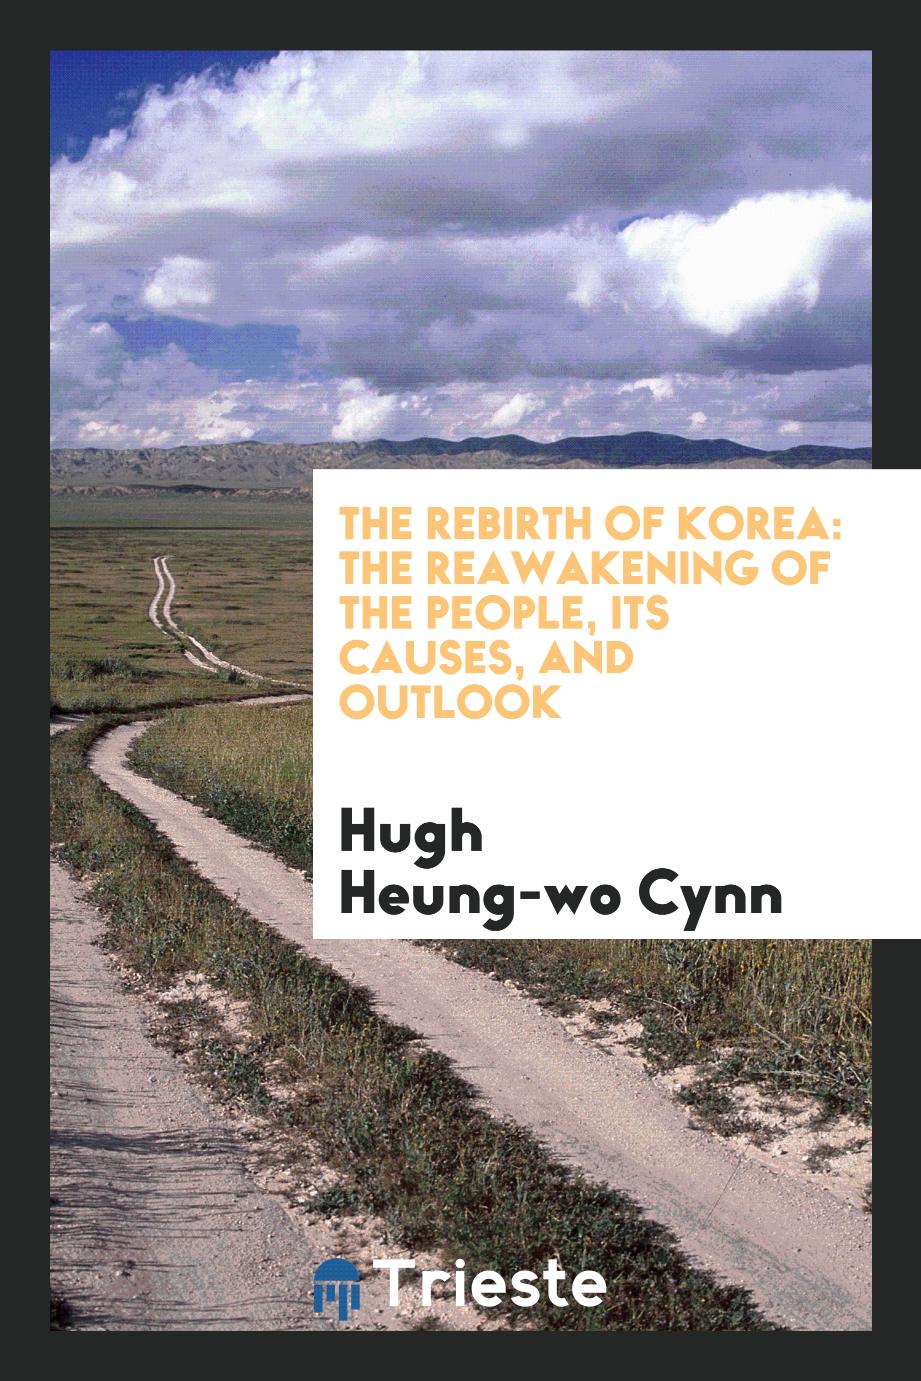 The rebirth of Korea: the reawakening of the people, its causes, and outlook